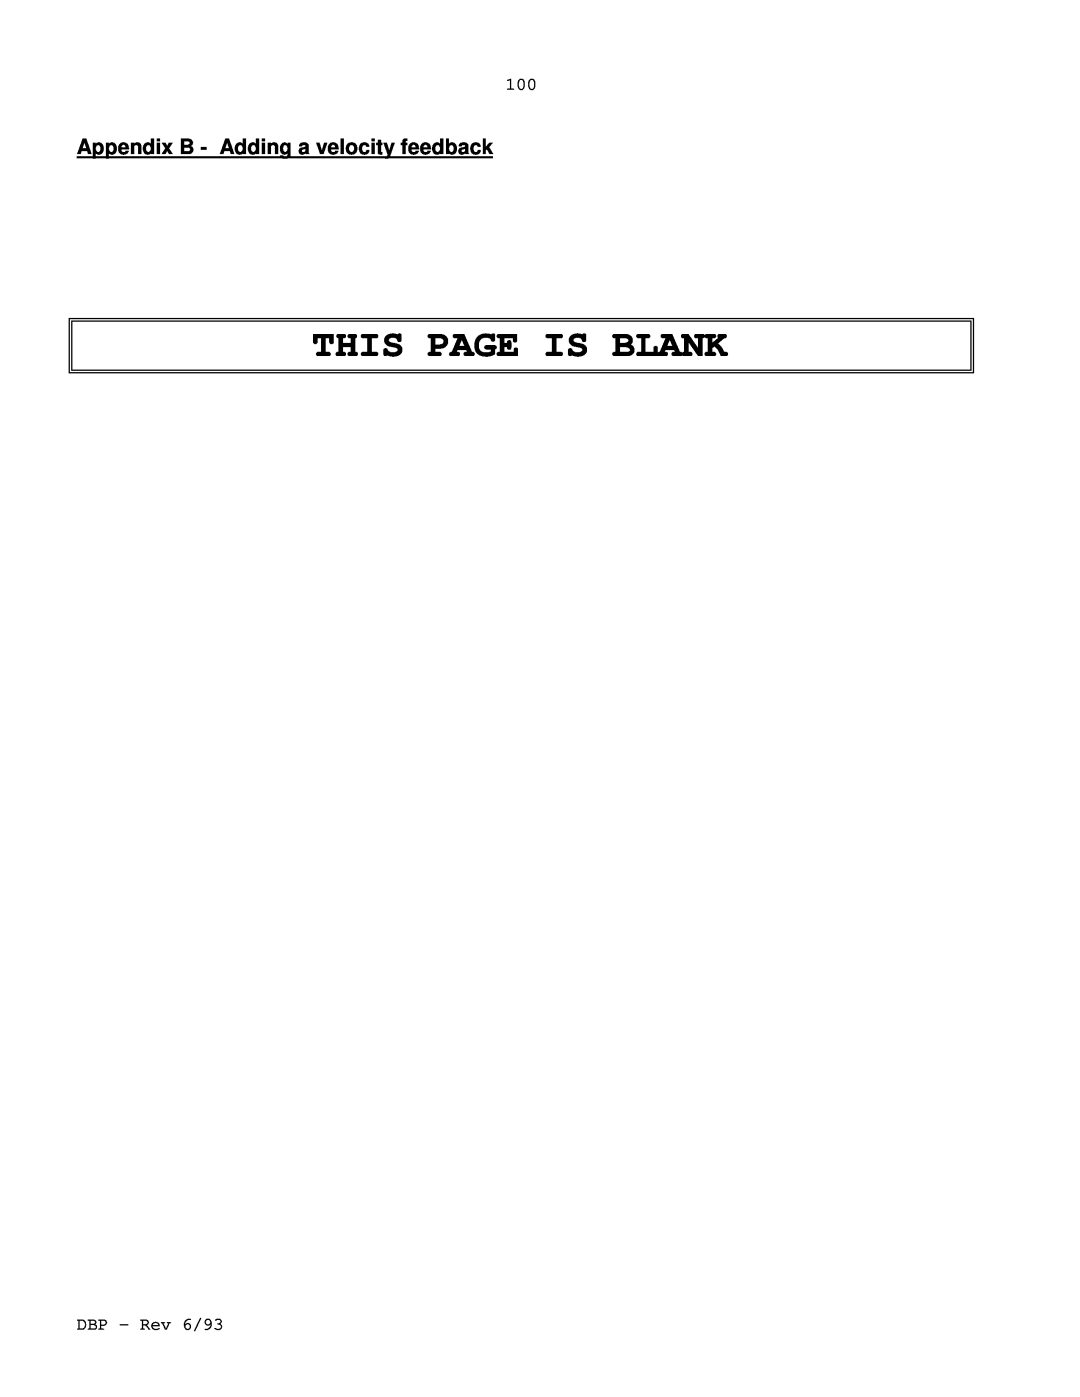 Elmo DBP SERIES manual Appendix B - Adding a velocity feedback, This Page Is Blank 